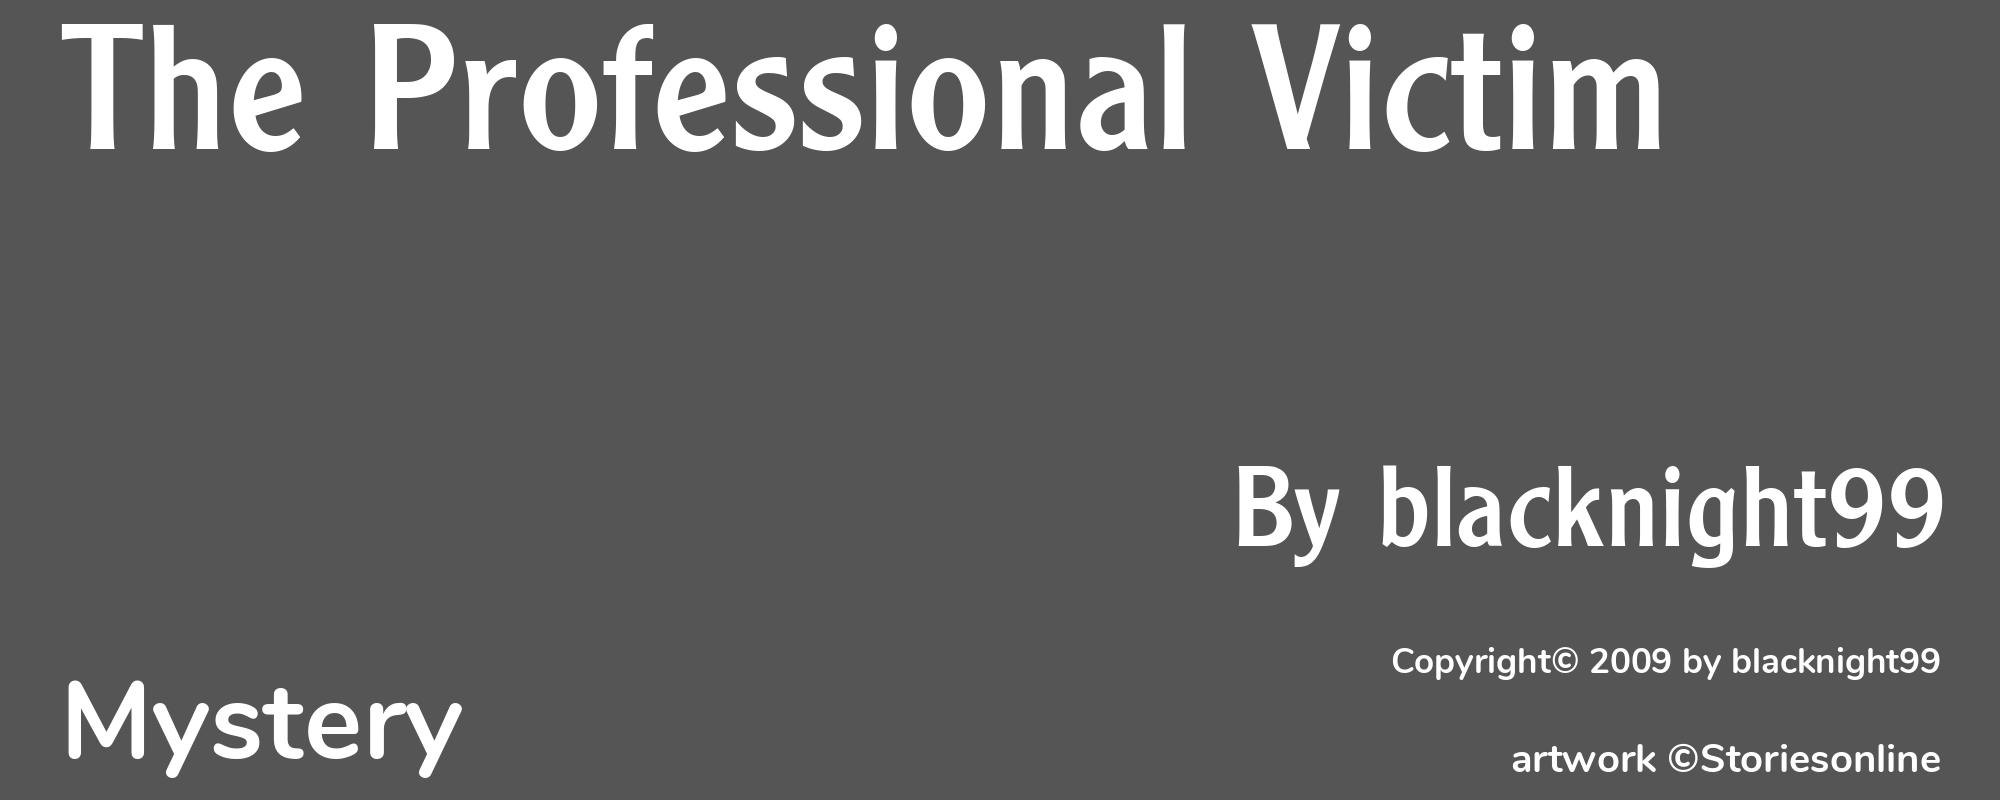 The Professional Victim - Cover